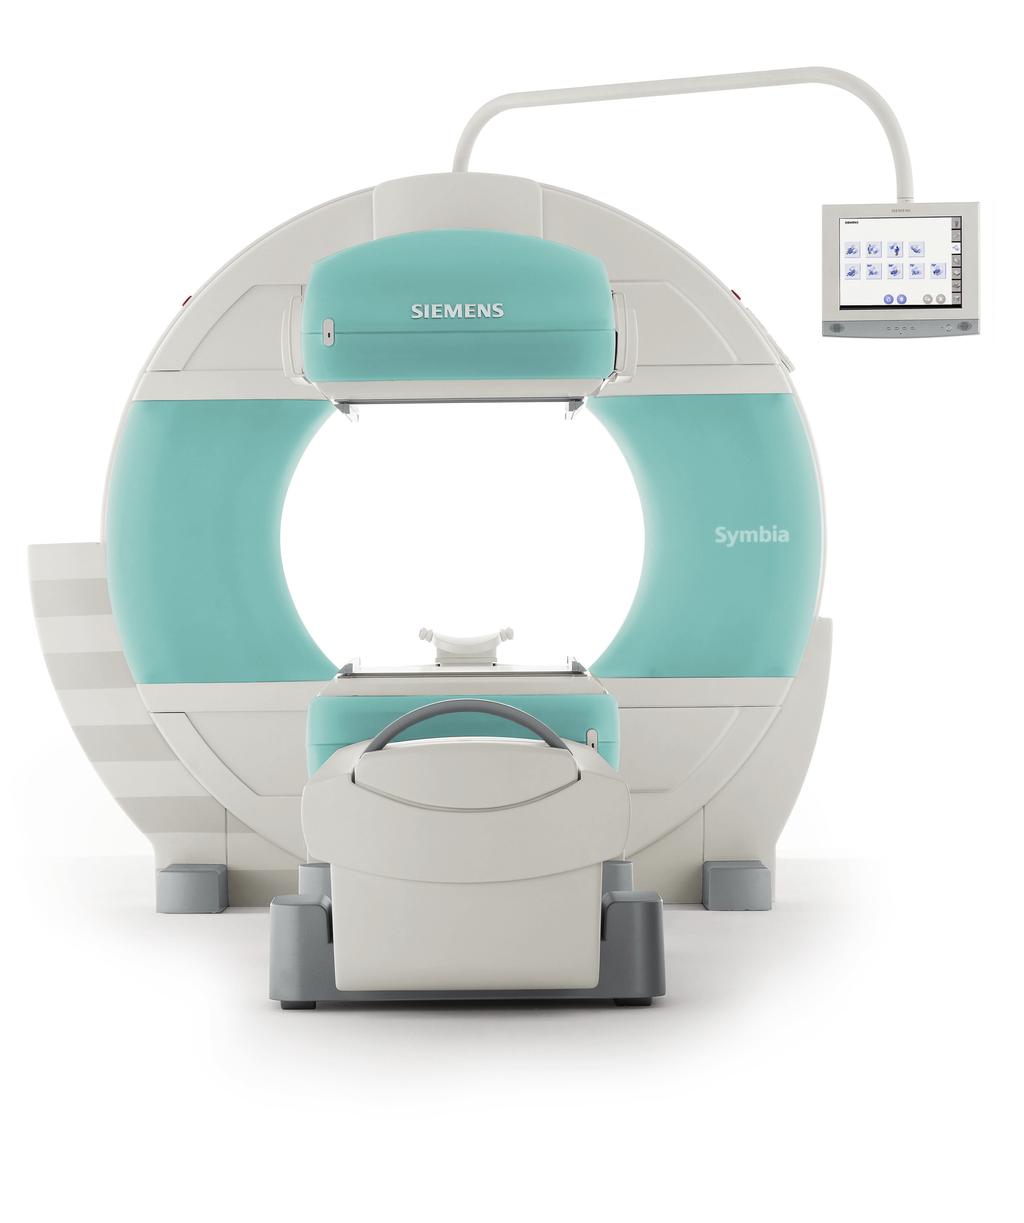 Symbia S: Accelerate your workflow. Operational costs and workflow. Diagnosis and treatment. Time affects every aspect of daily imaging from patients well-being to staff efficiency.